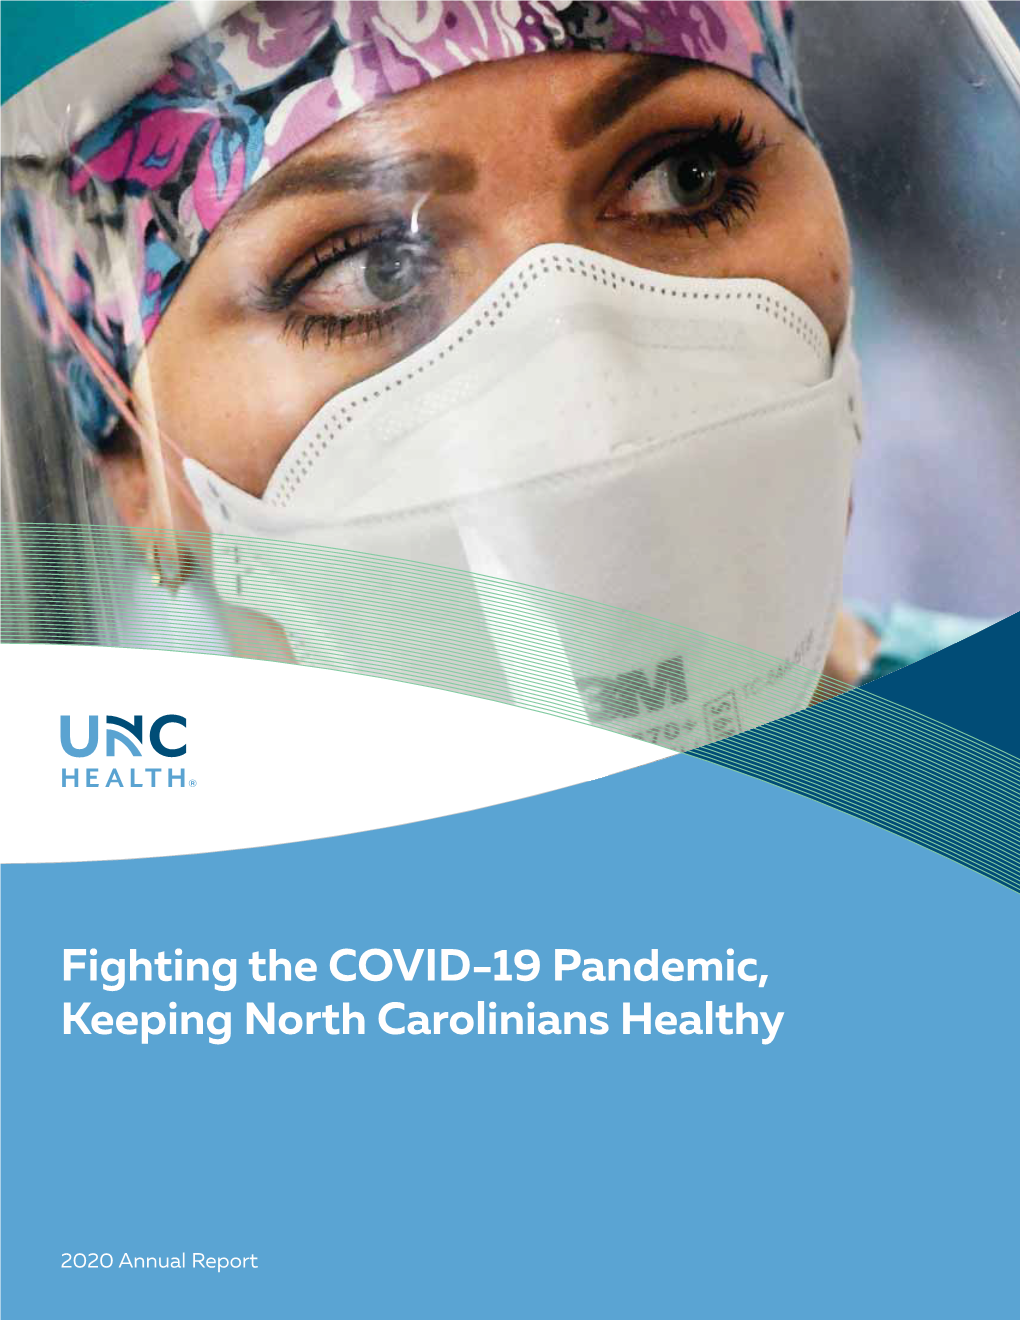 Fighting the COVID-19 Pandemic, Keeping North Carolinians Healthy